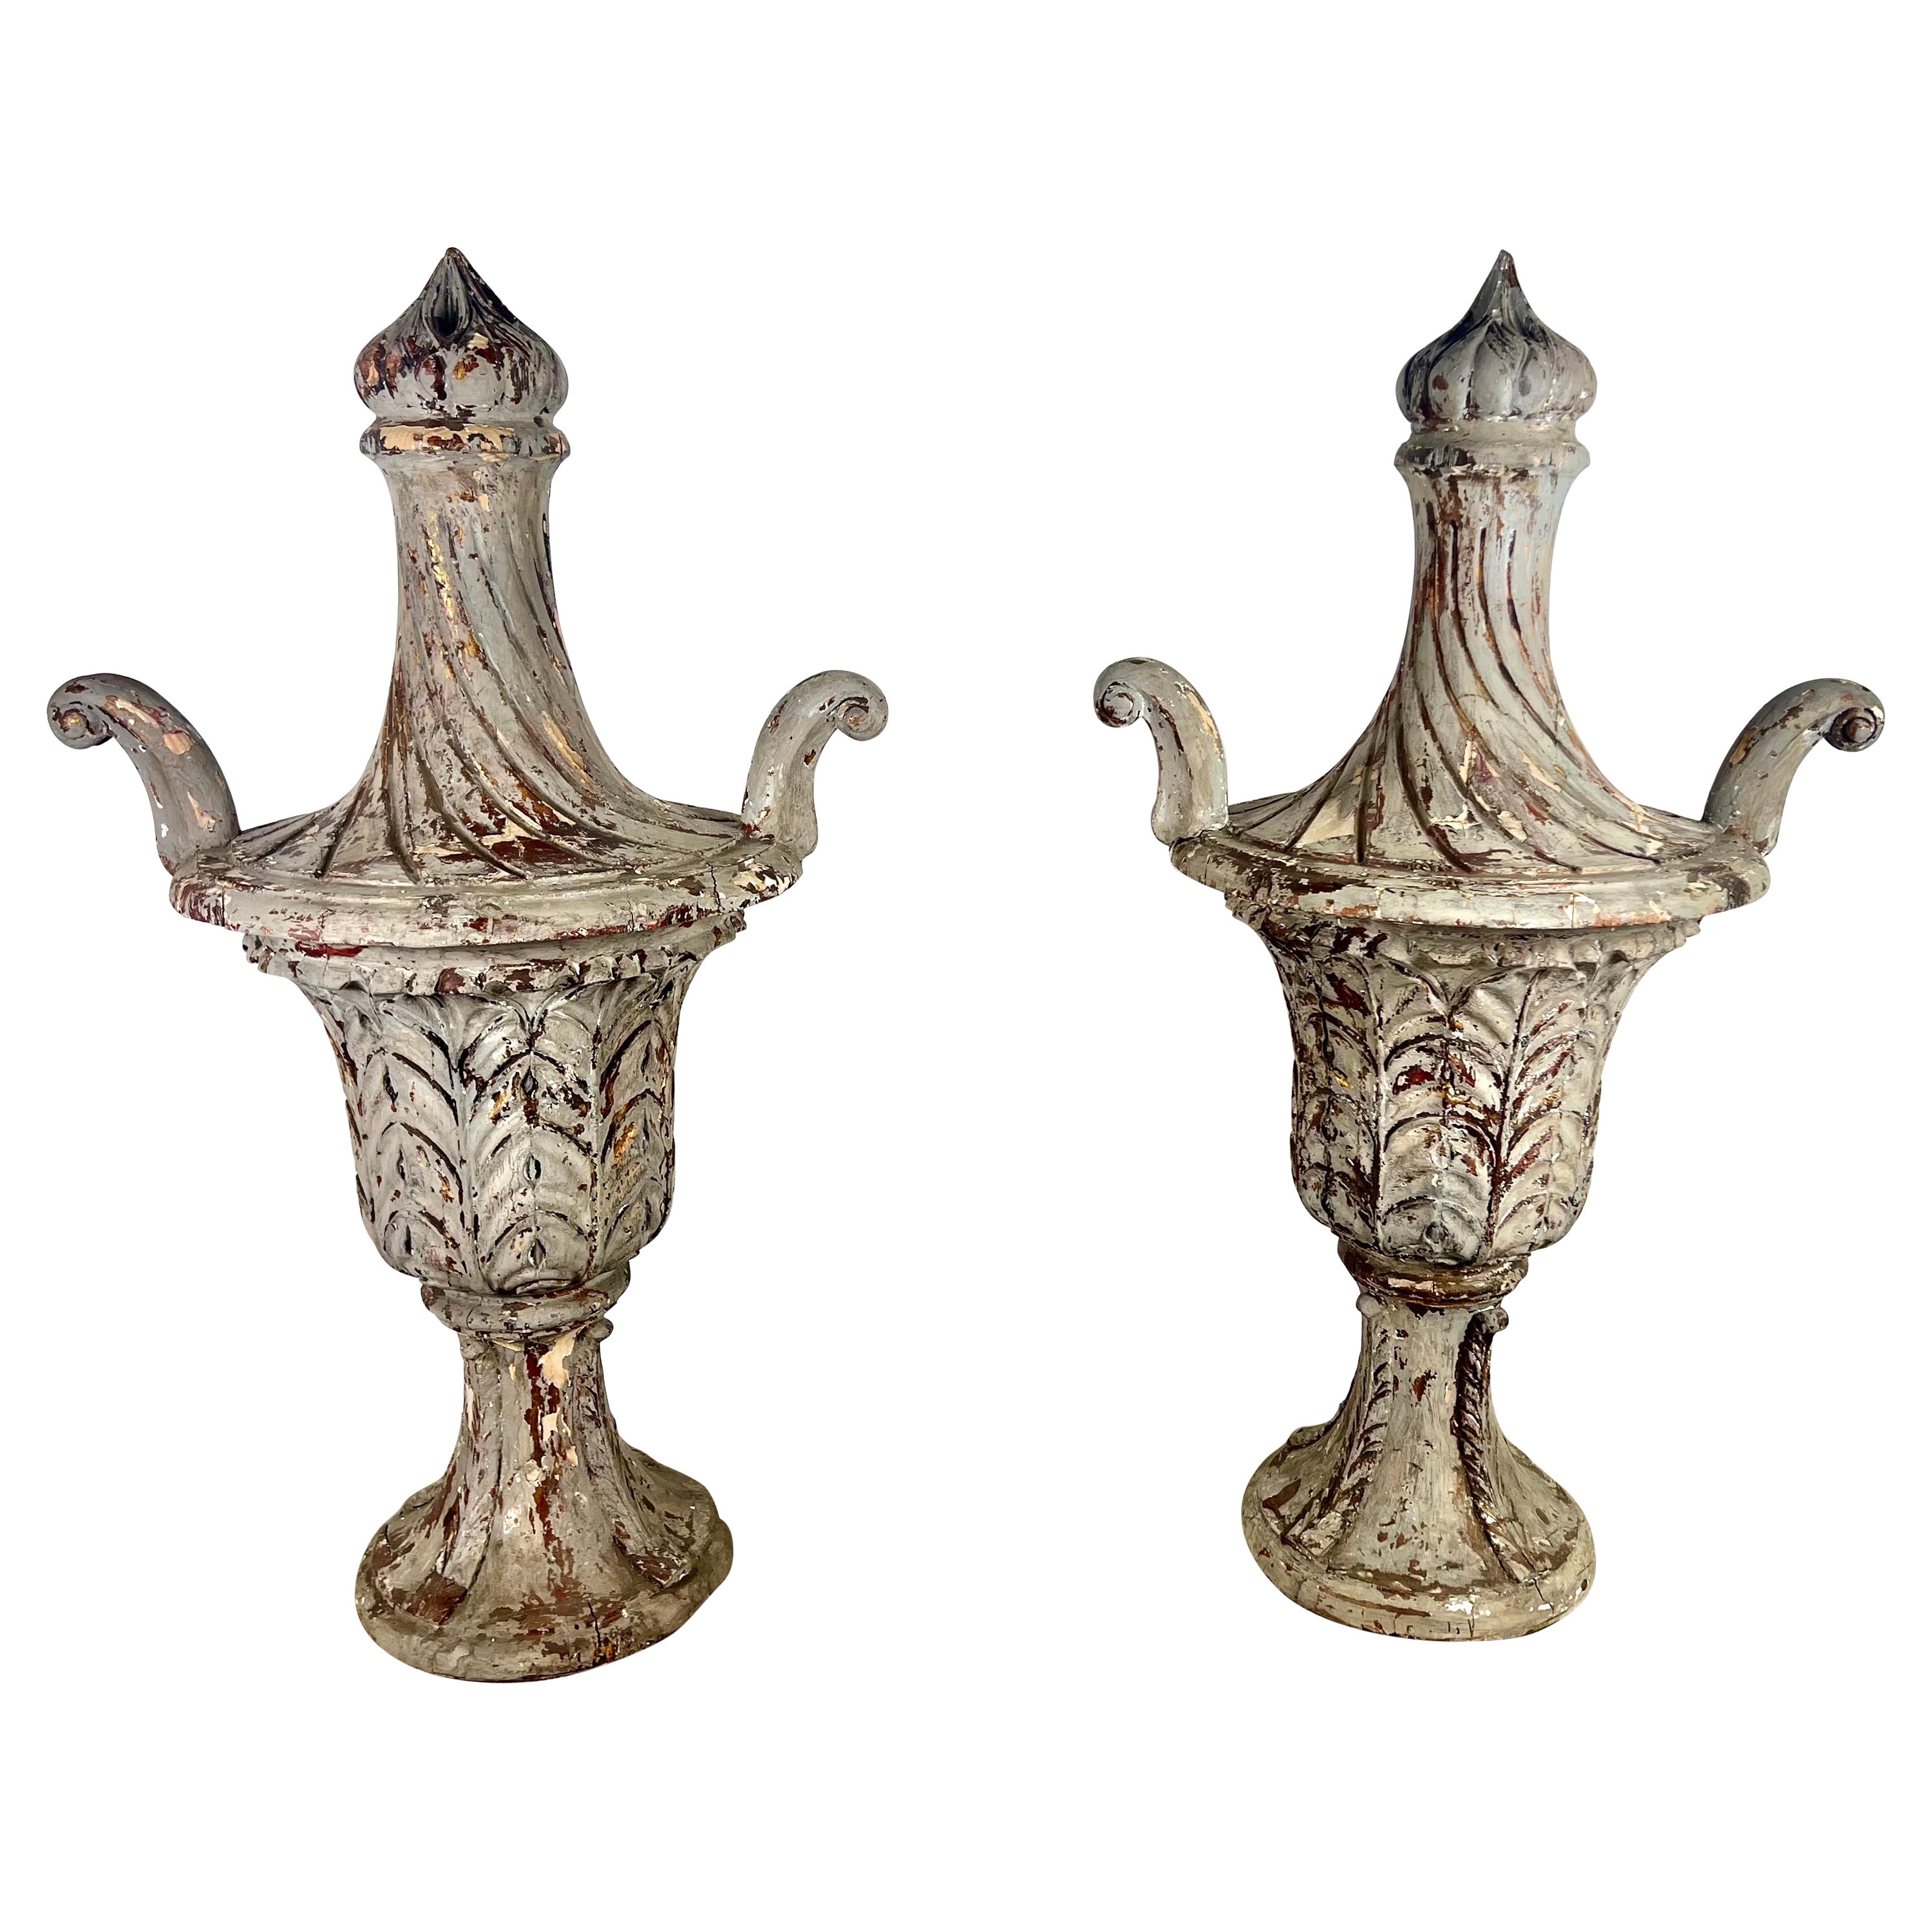 Pair of 19th C. Italian Carved Painted Finials